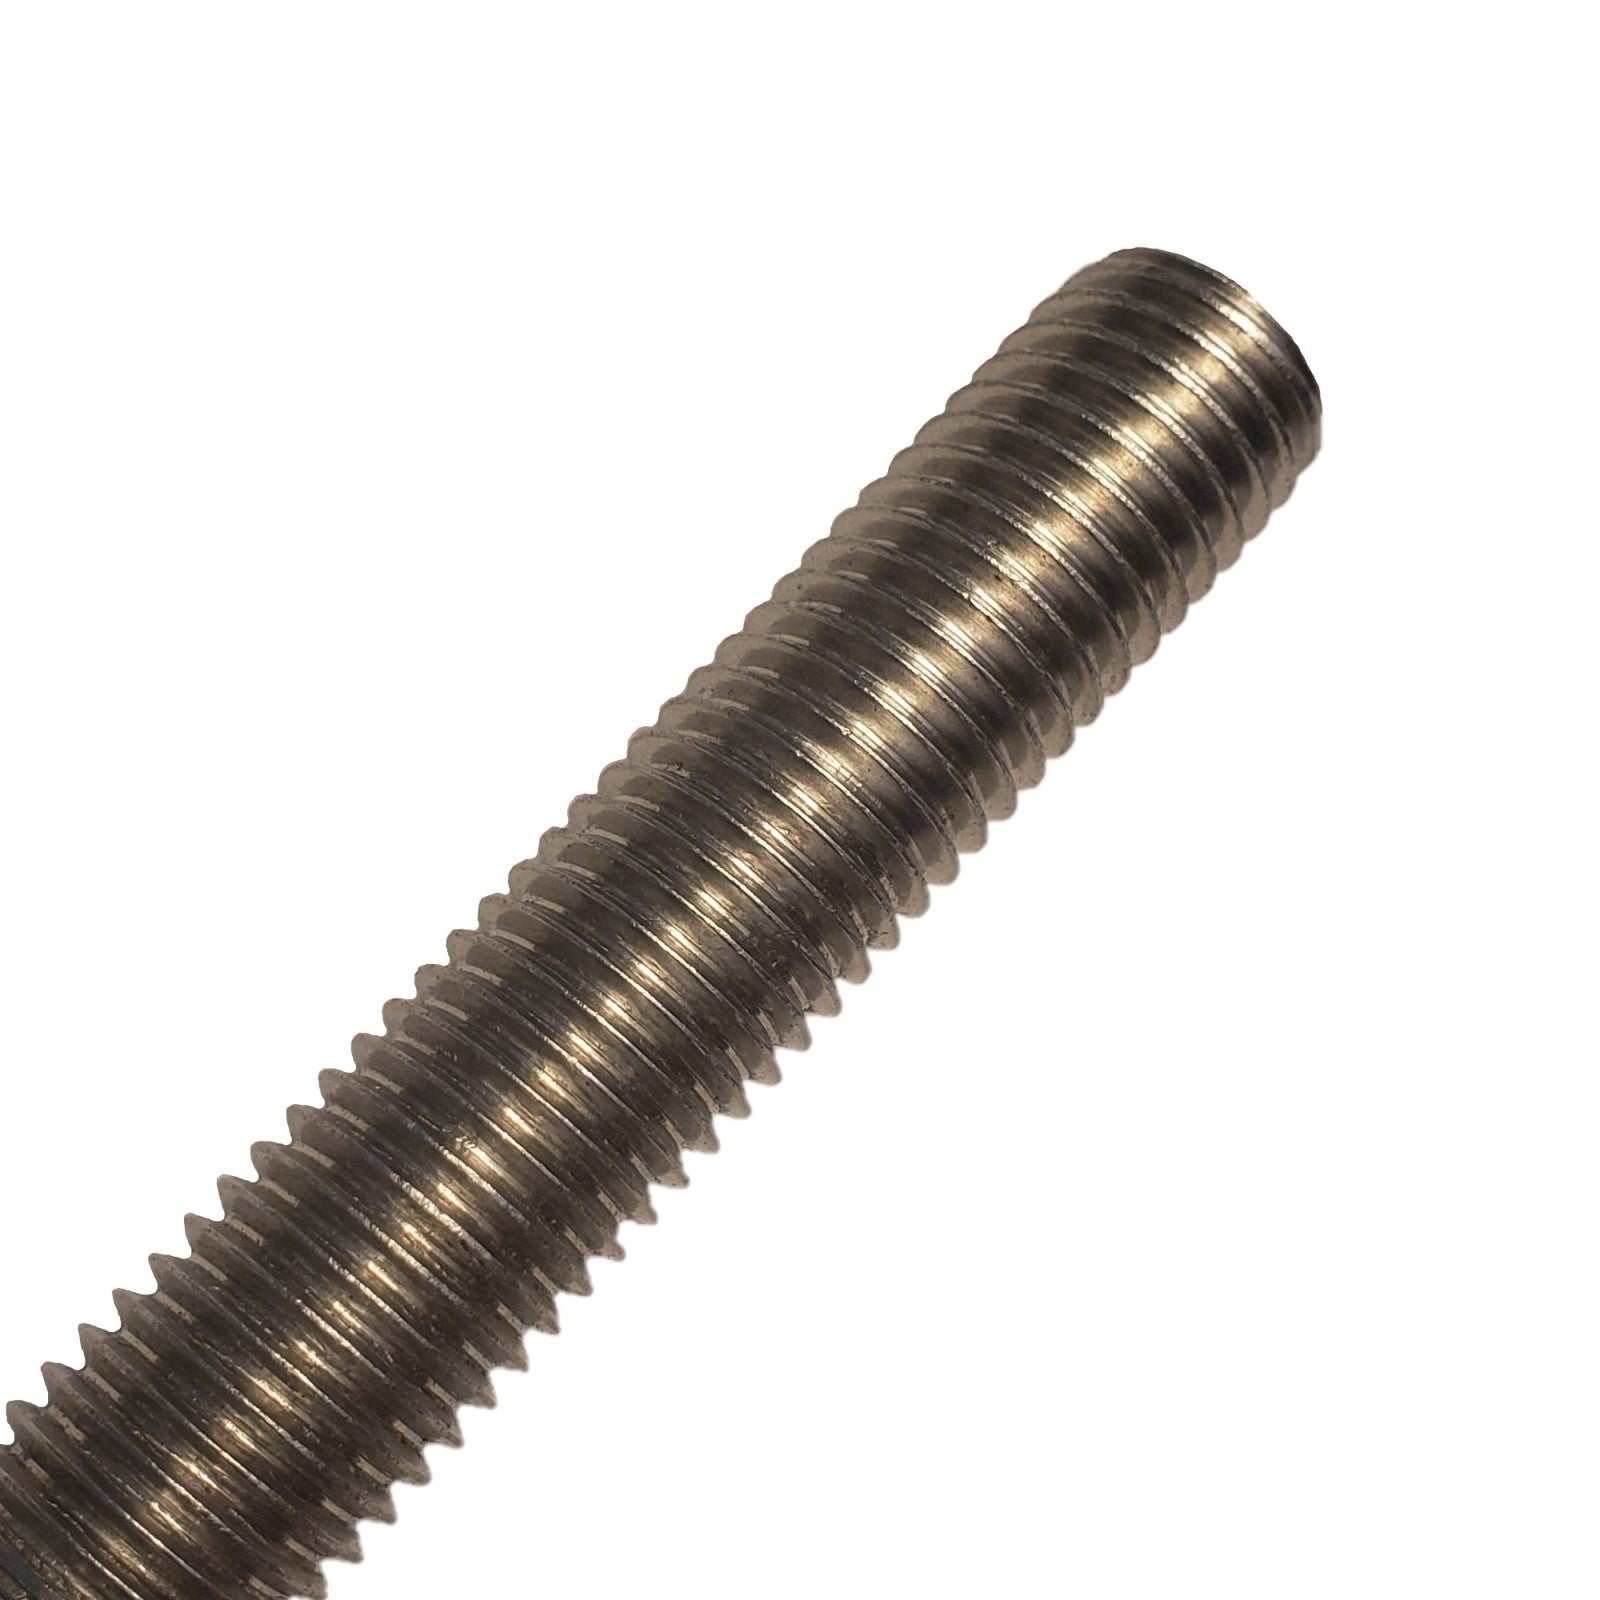 38 inch16 x 24 inch 316 Stainless Steel Threaded Rod